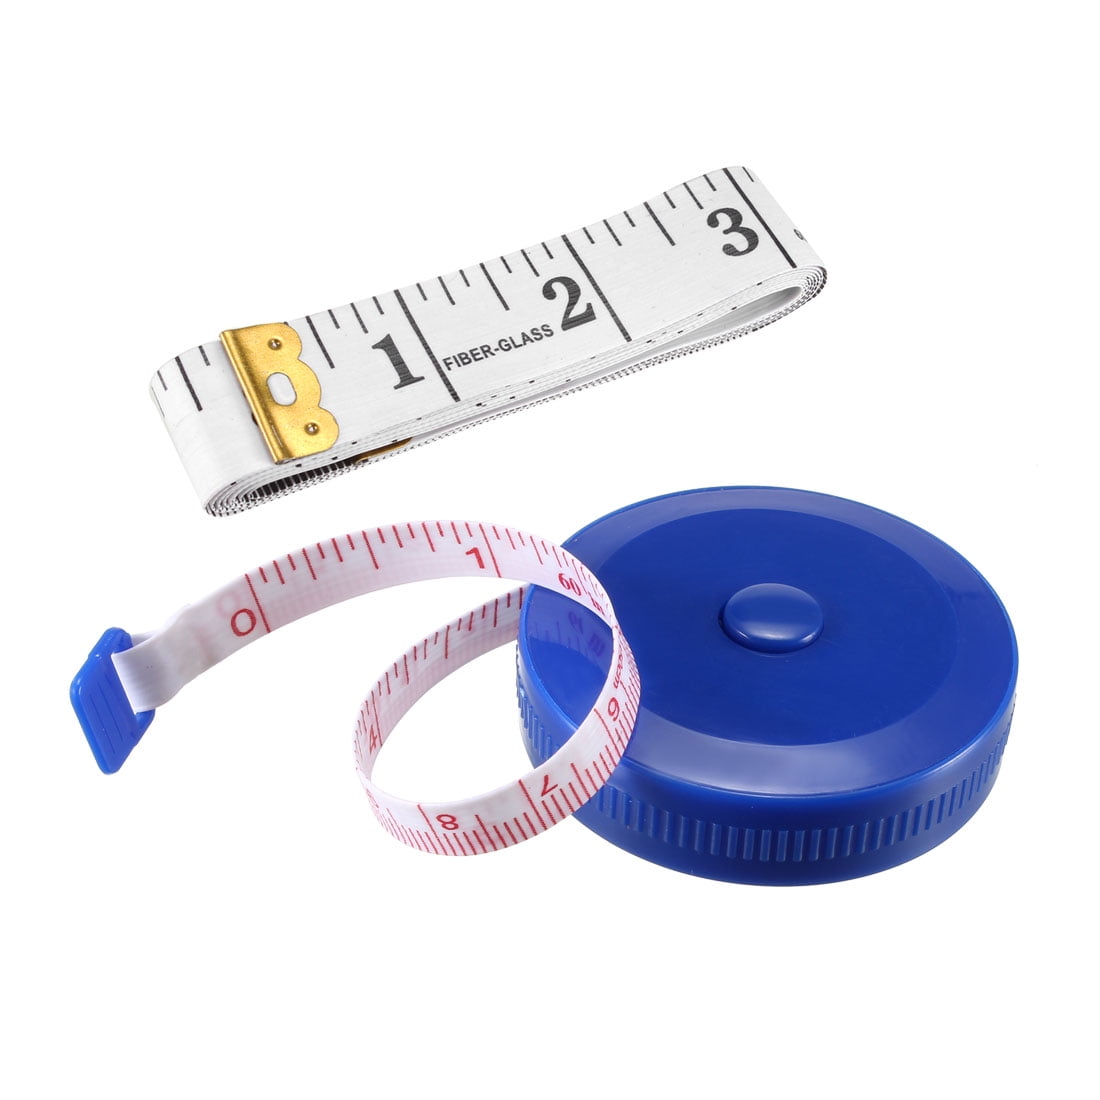 MarinoBIRD 60-Inch 1.5 Meter Soft and Retractable Tape Measure Medical Body Measurement Tailor Sewing Craft Cloth Dieting Measuring Tape 